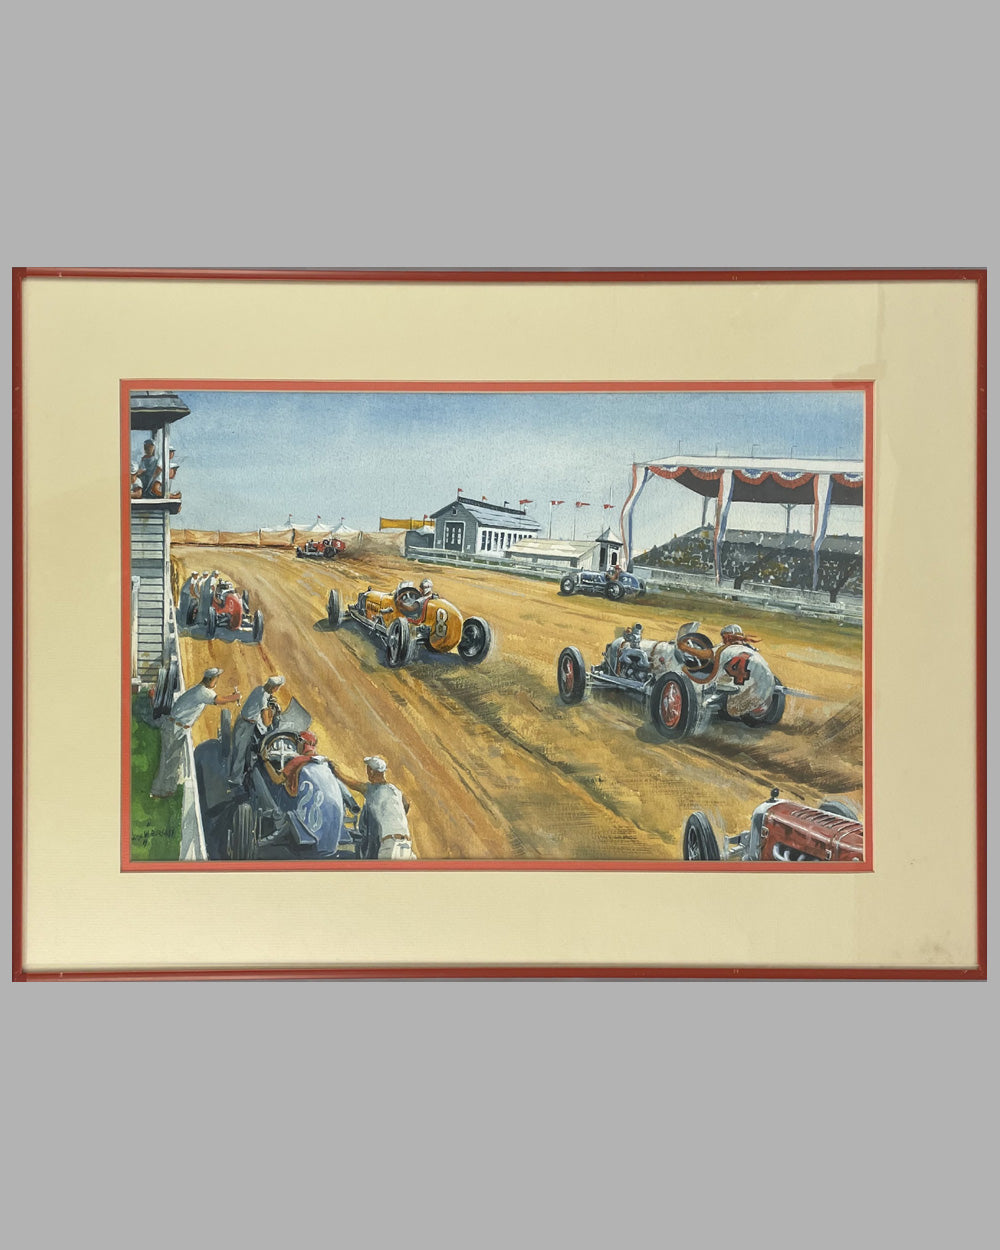 "At the Races" original gouache painting by John Burgess